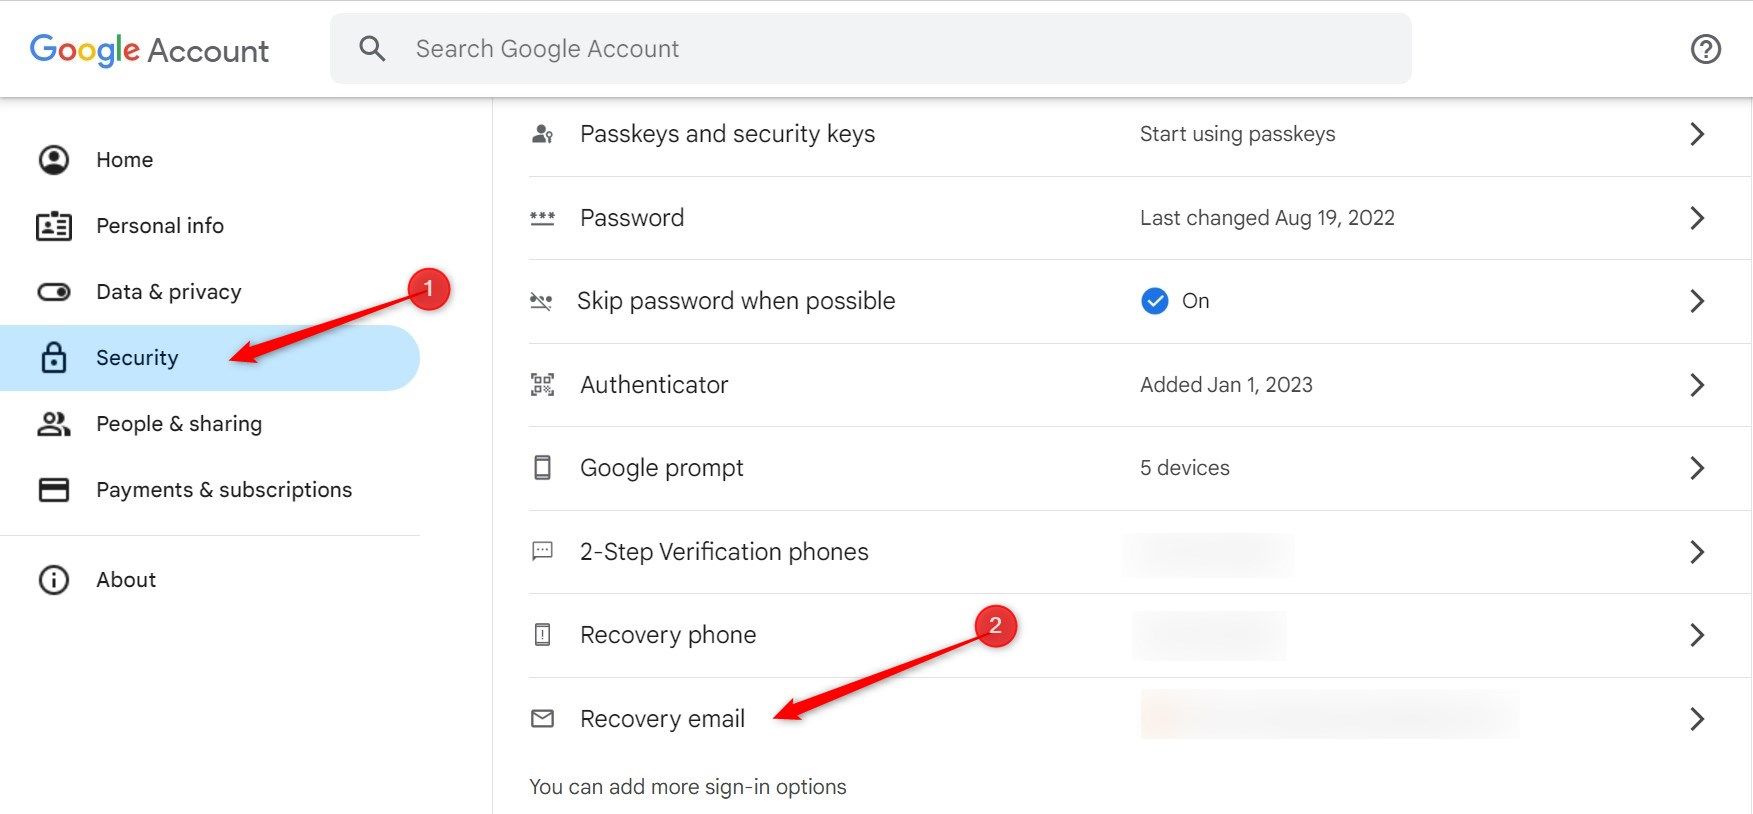 Gmail Account Security Page